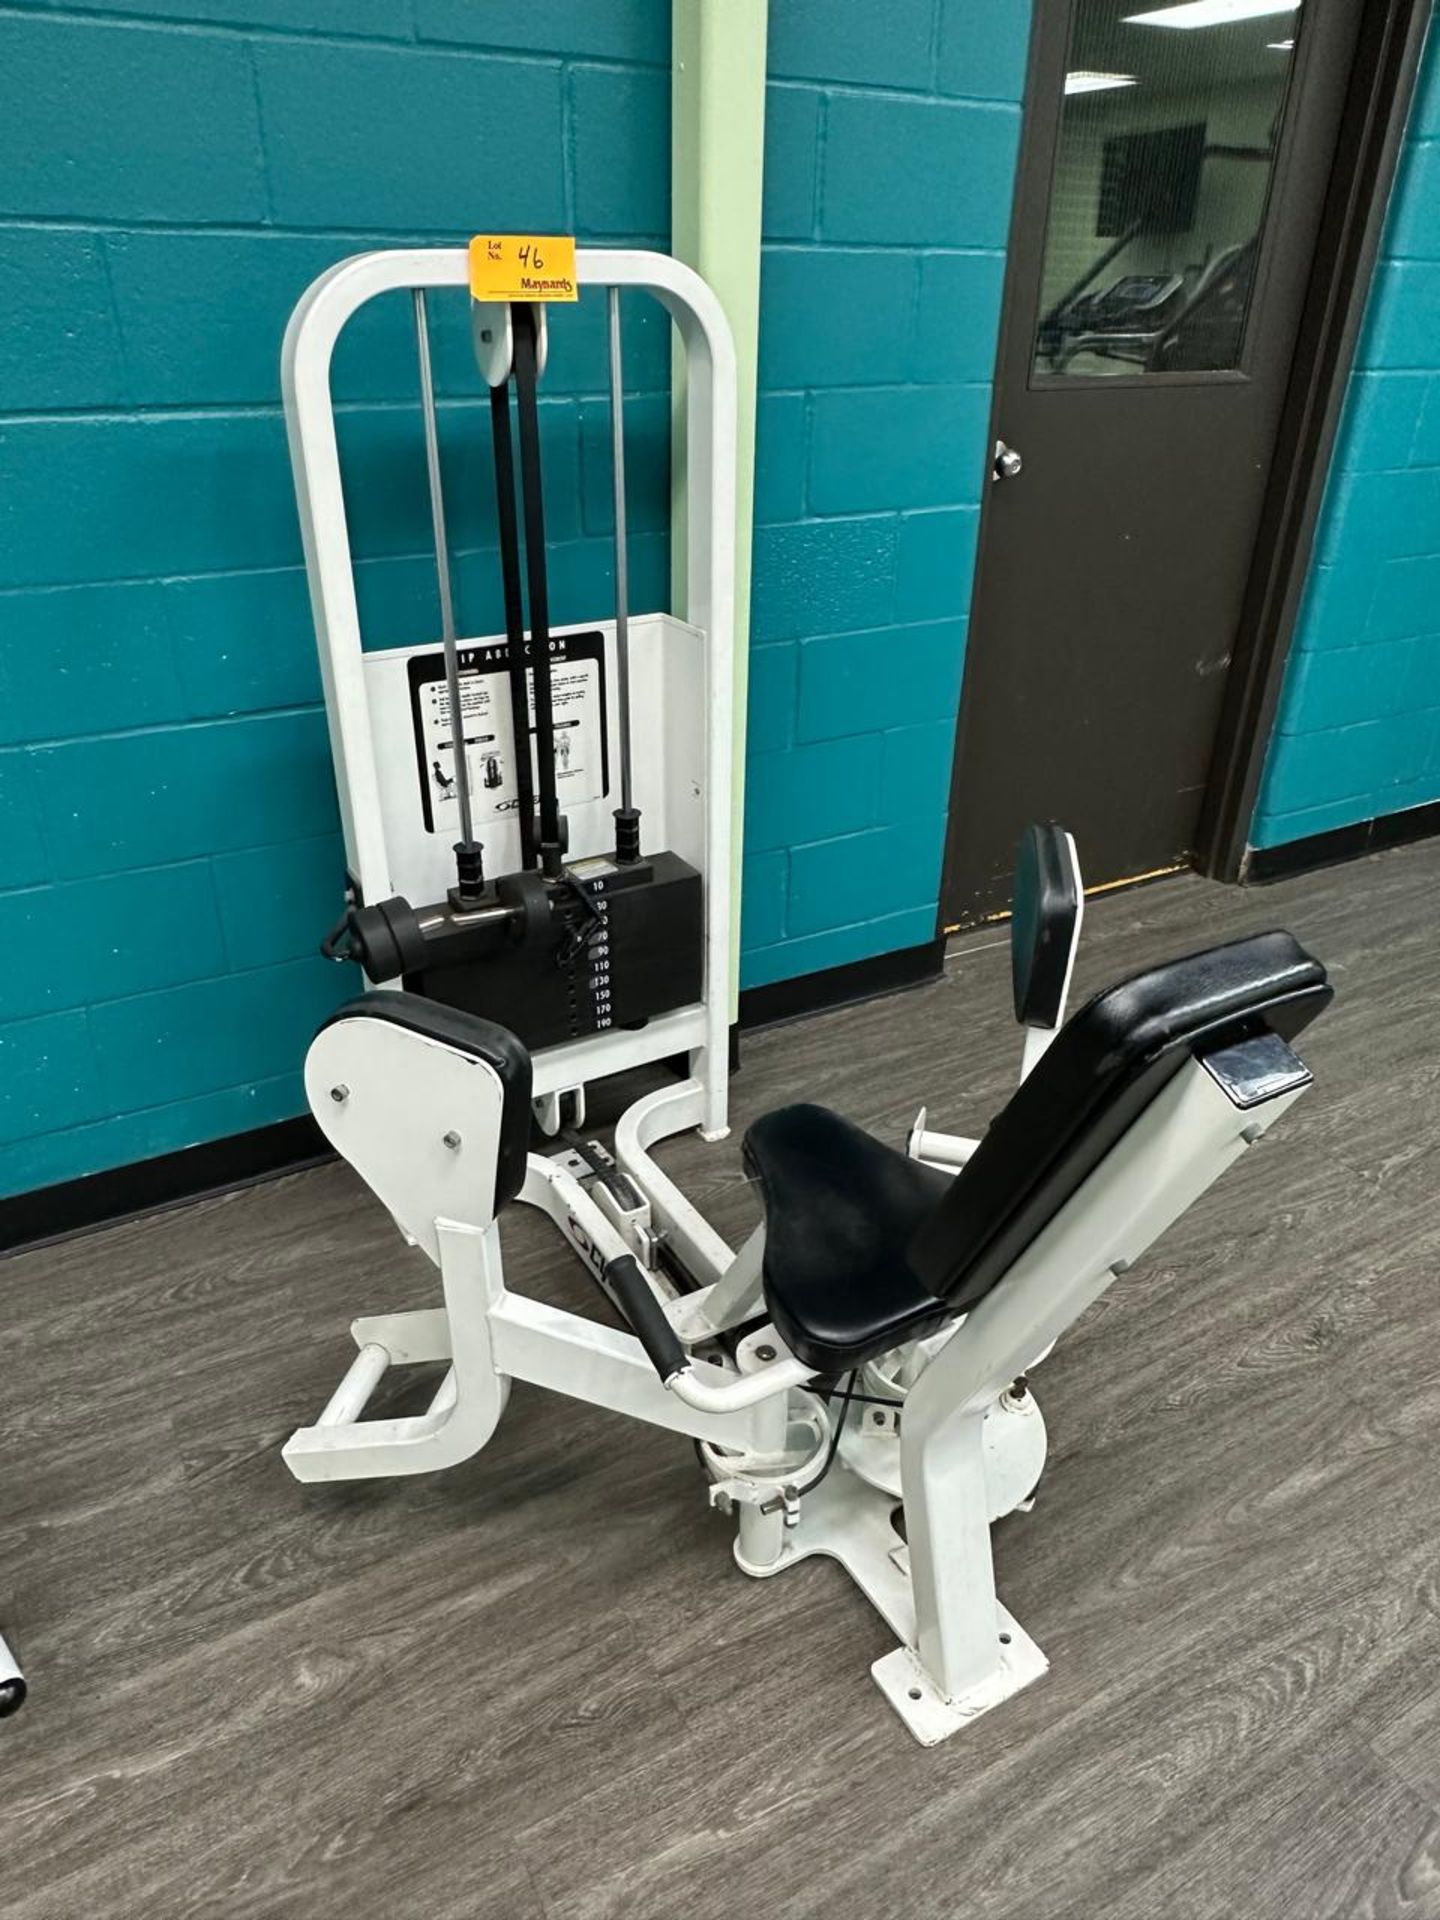 Cybex Hip Abduction - Image 4 of 4